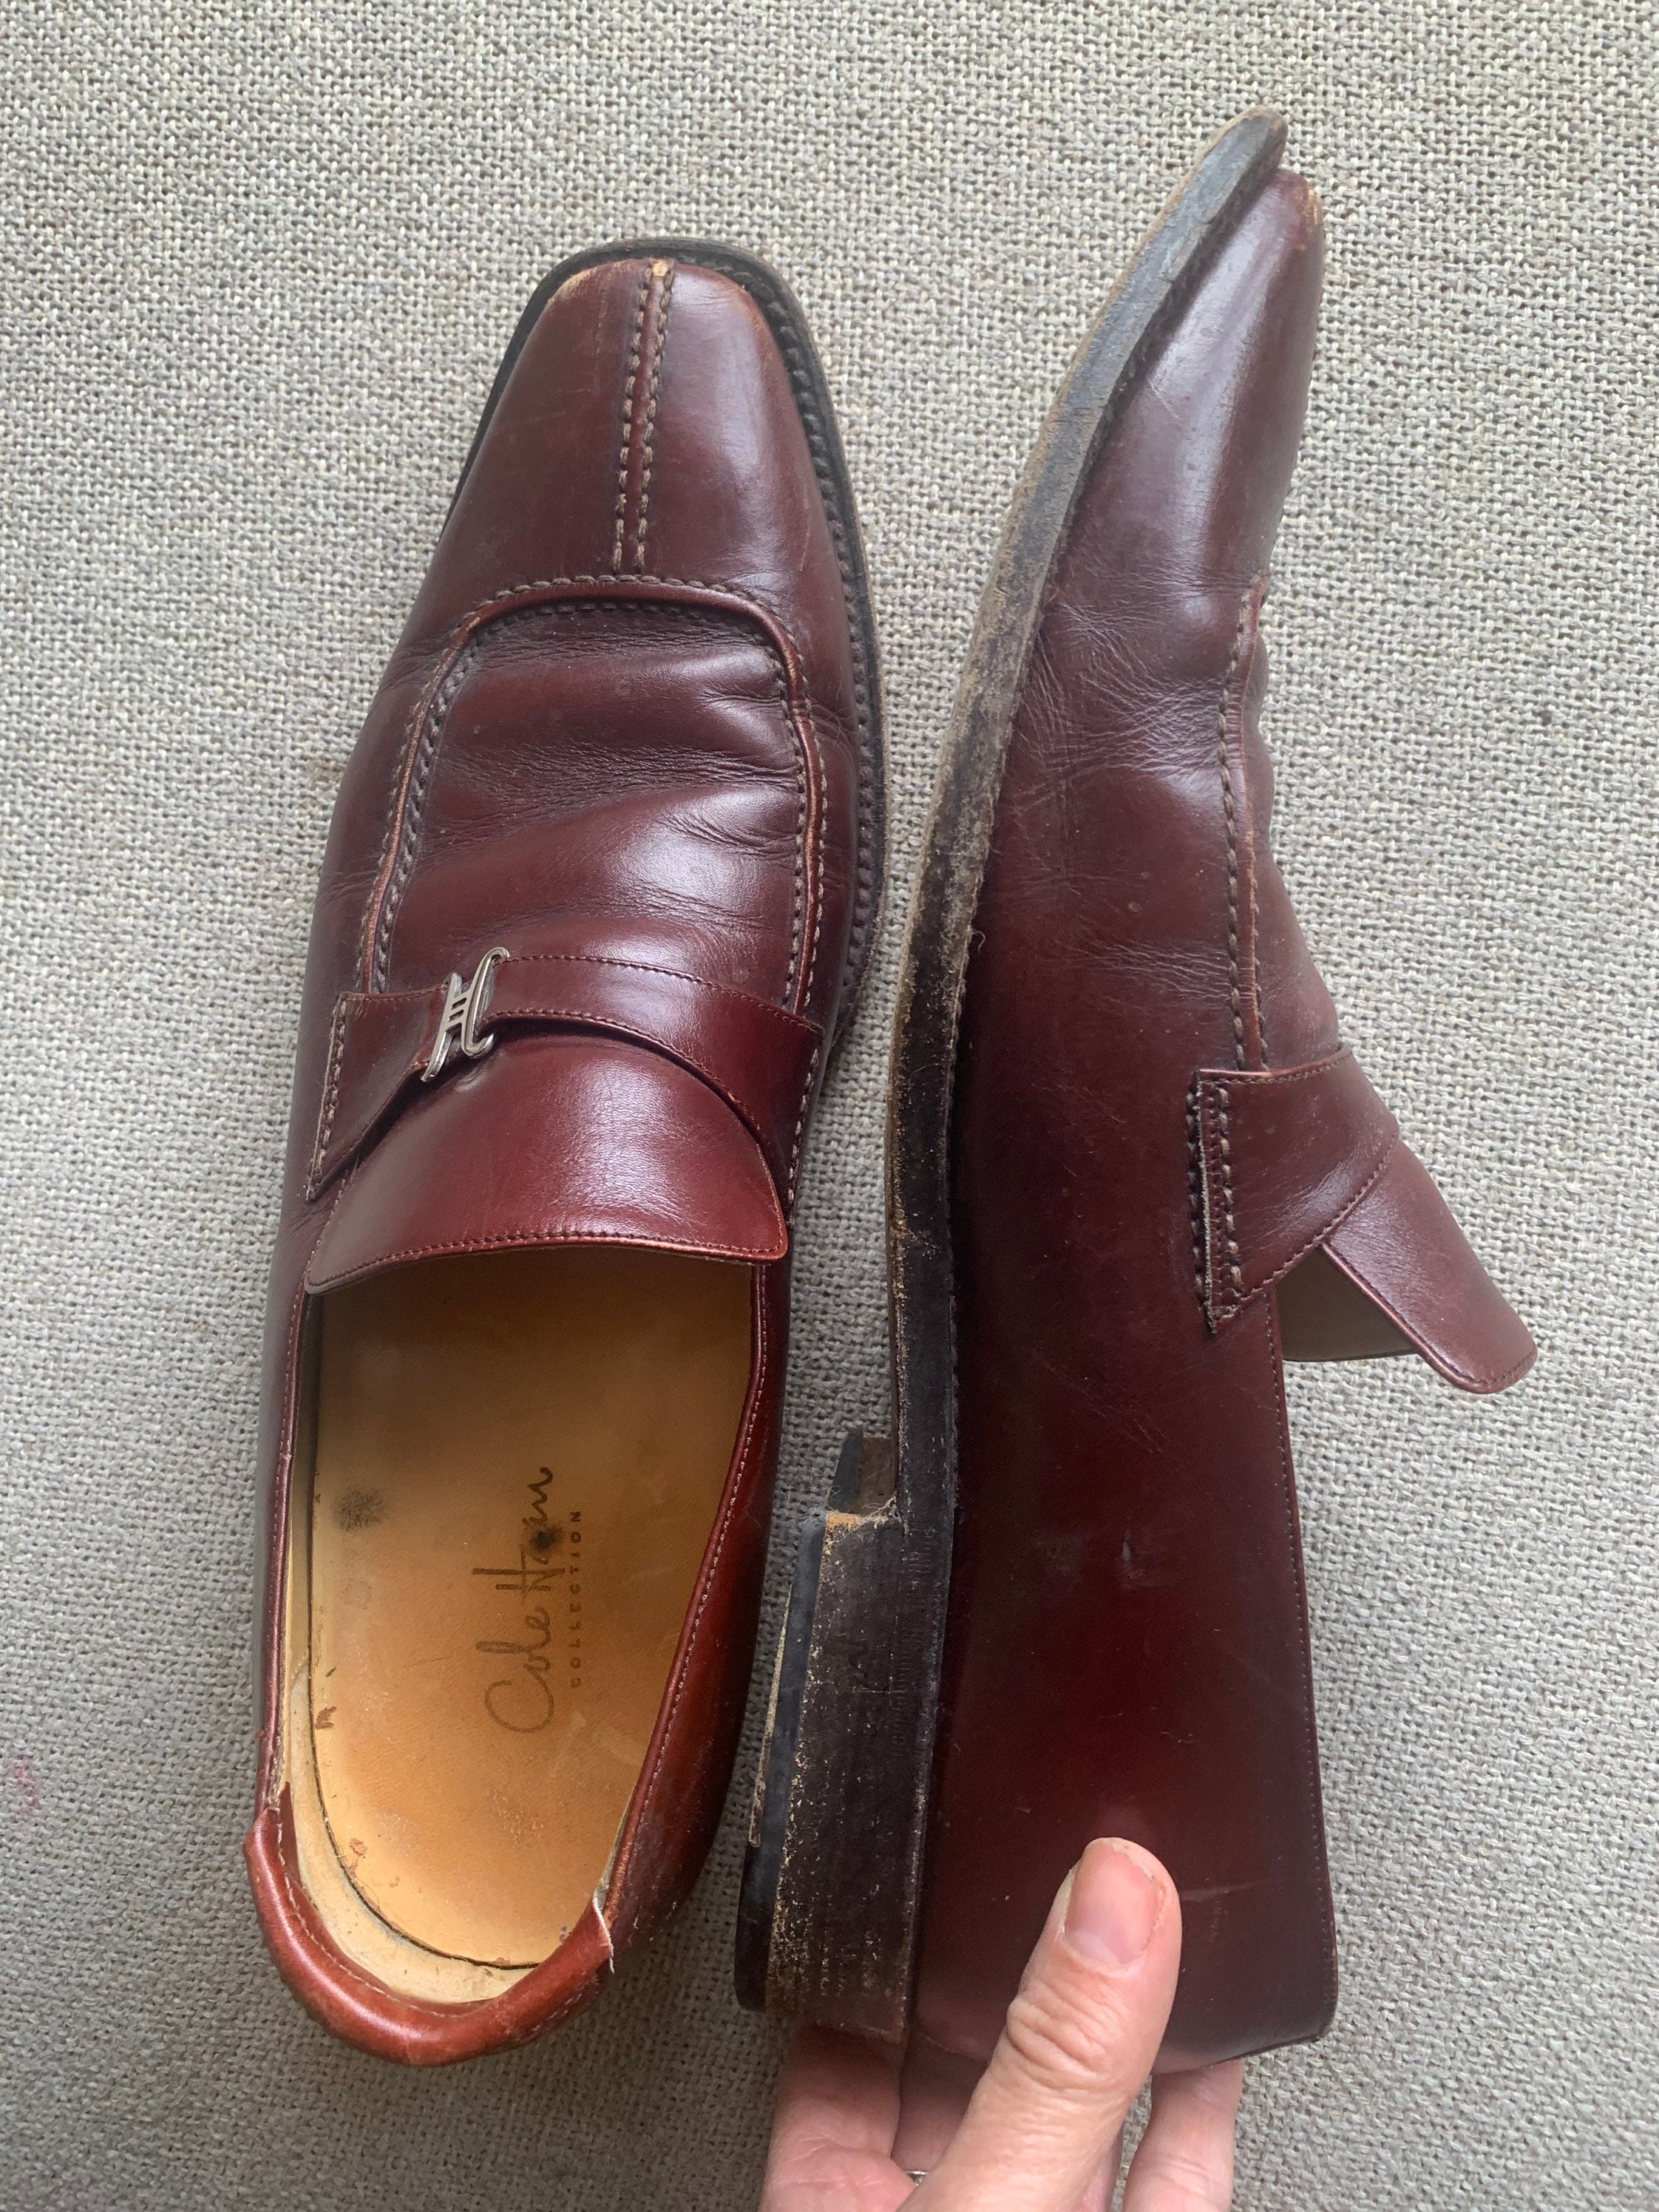 Vintage 1970's Cole Haan Collection Men's Loafers Size Size 8.5 M Made ...